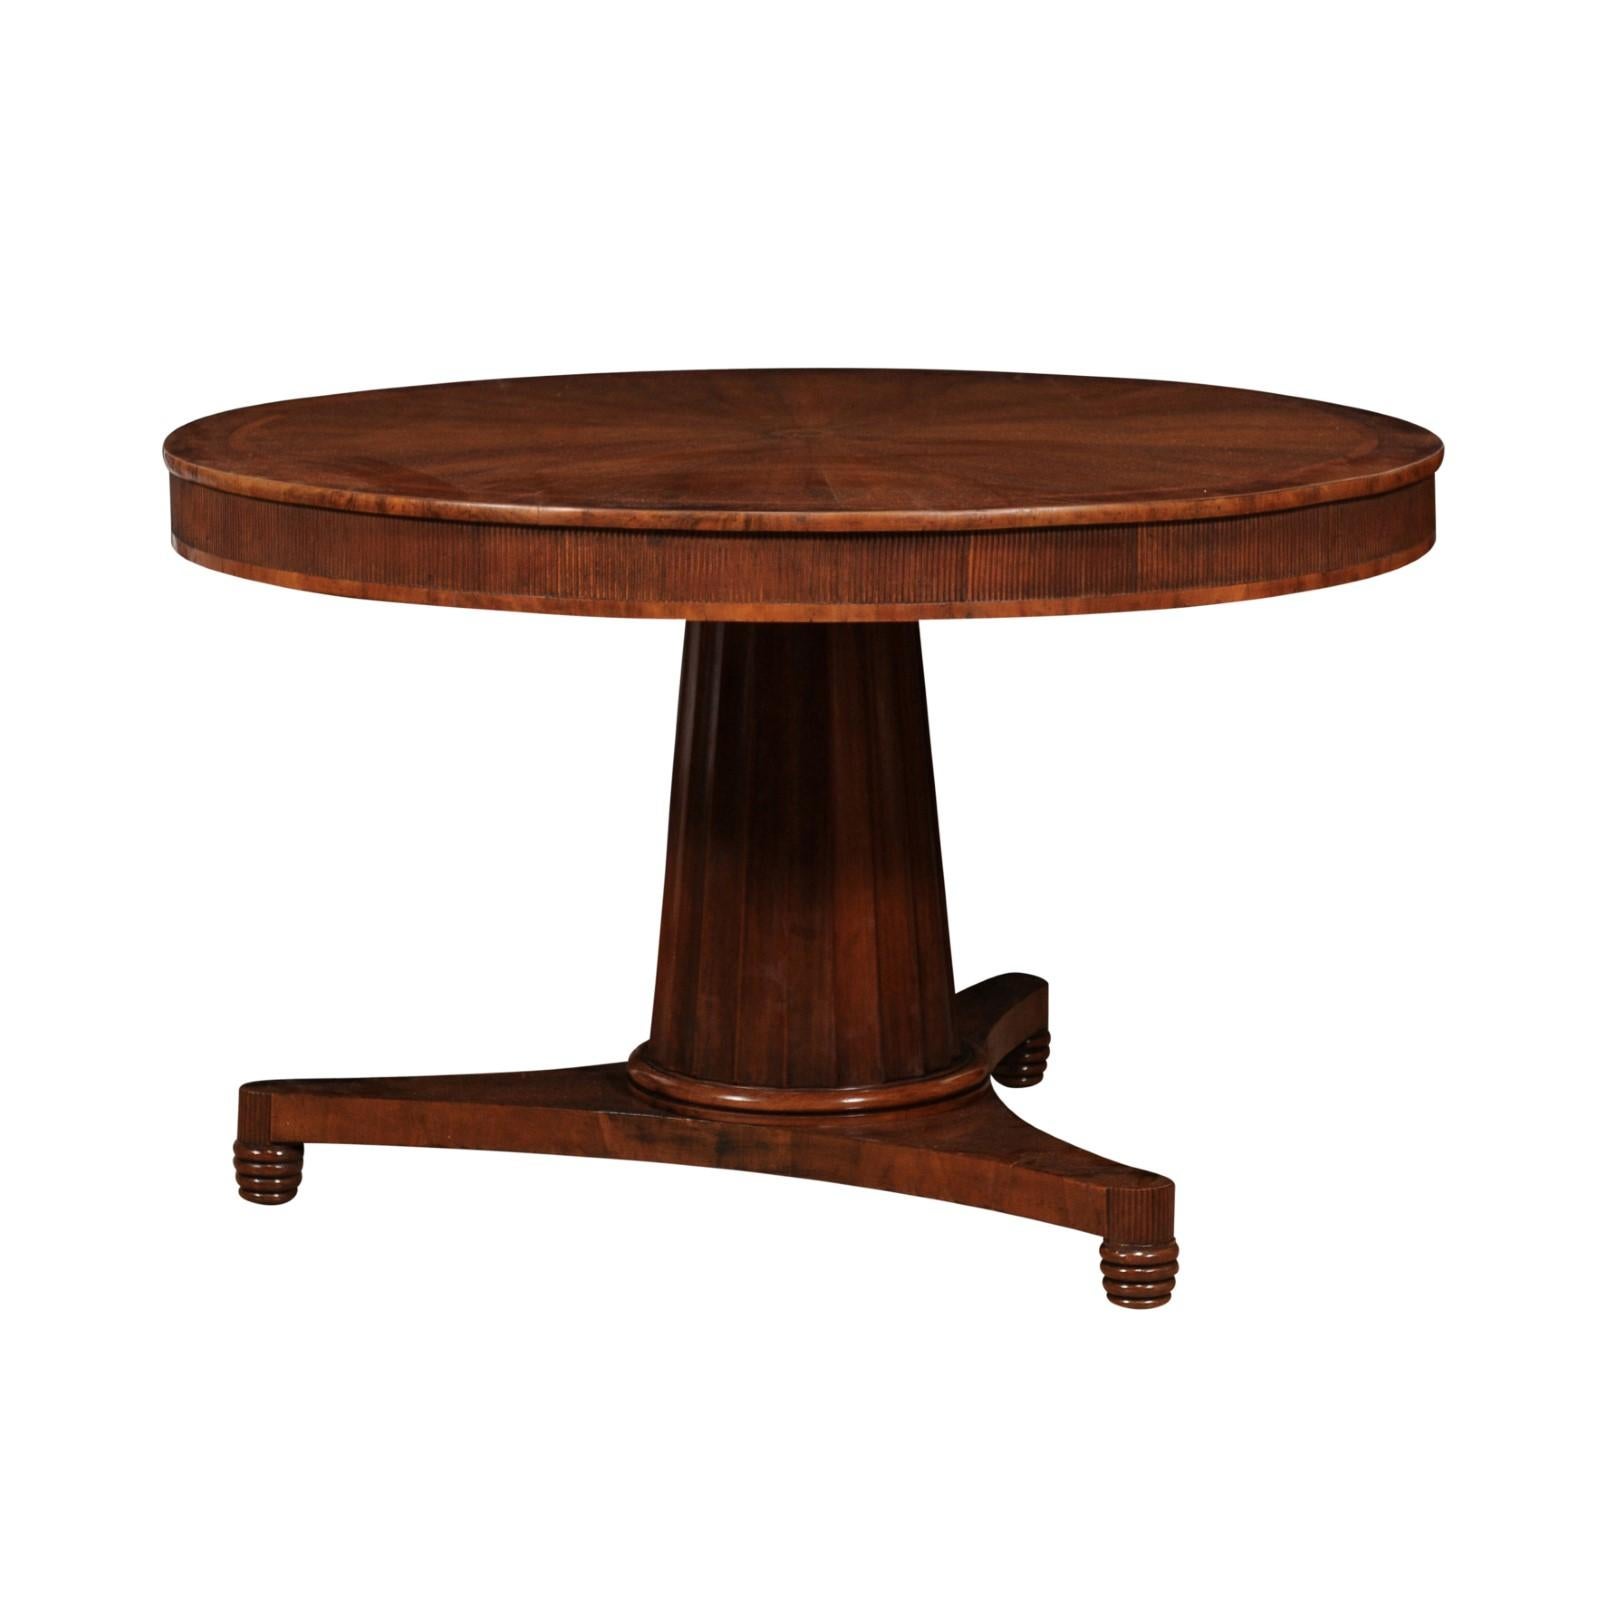 An Italian Turn of the Century walnut pedestal center table from circa 1900, with radiating veneer on the circular top, carved reeded apron, two small drawers and tripod base. Elevate your living space with the distinctive character of this Italian